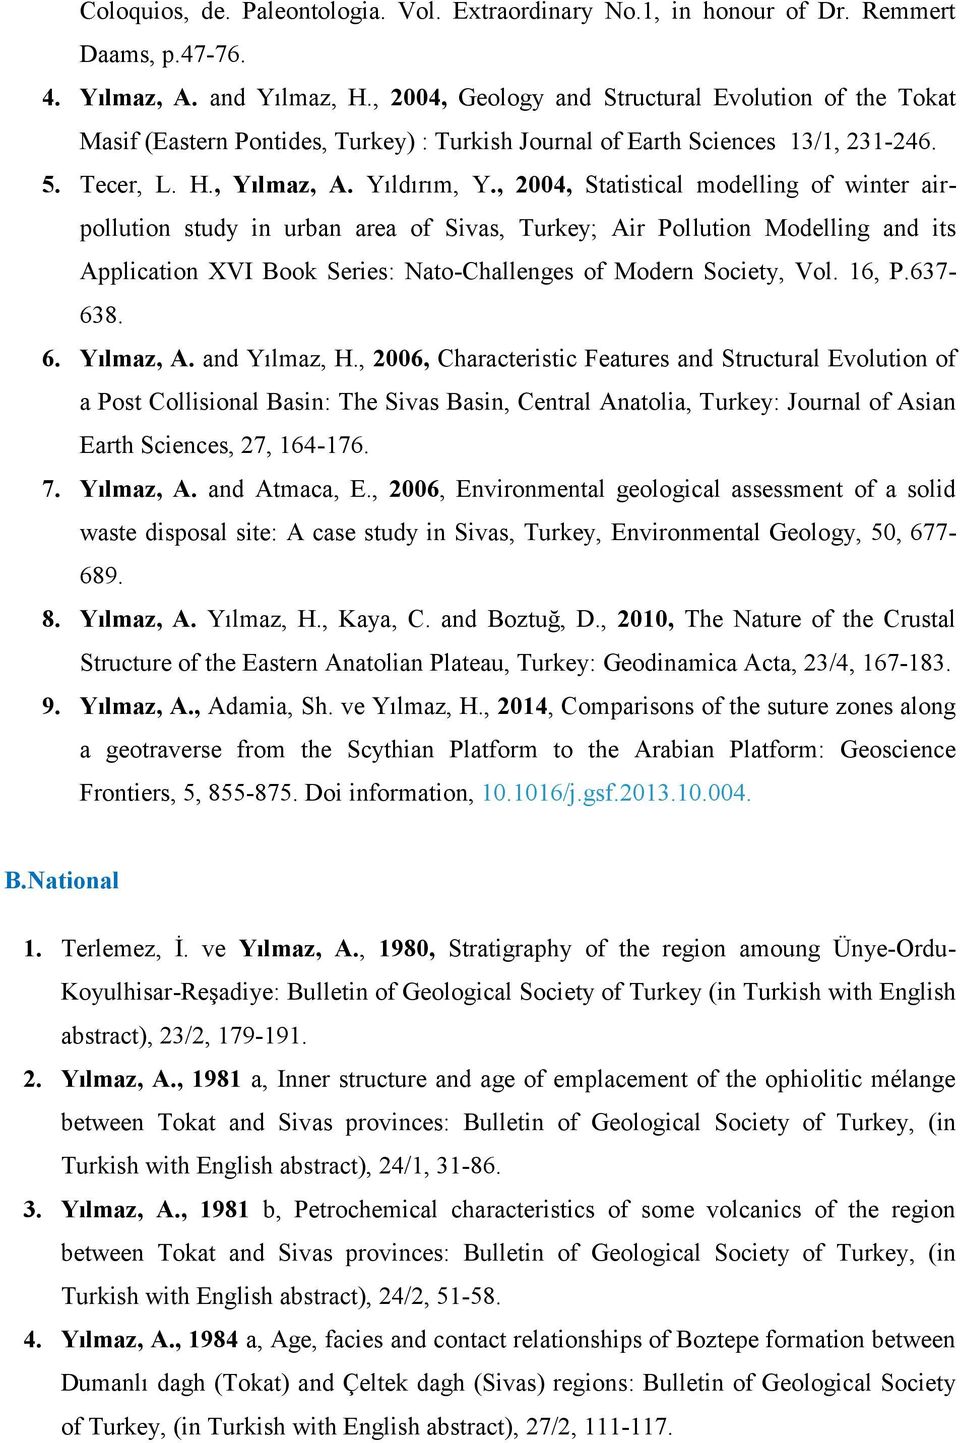 , 2004, Statistical modelling of winter airpollution study in urban area of Sivas, Turkey; Air Pollution Modelling and its Application XVI Book Series: Nato-Challenges of Modern Society, Vol. 16, P.